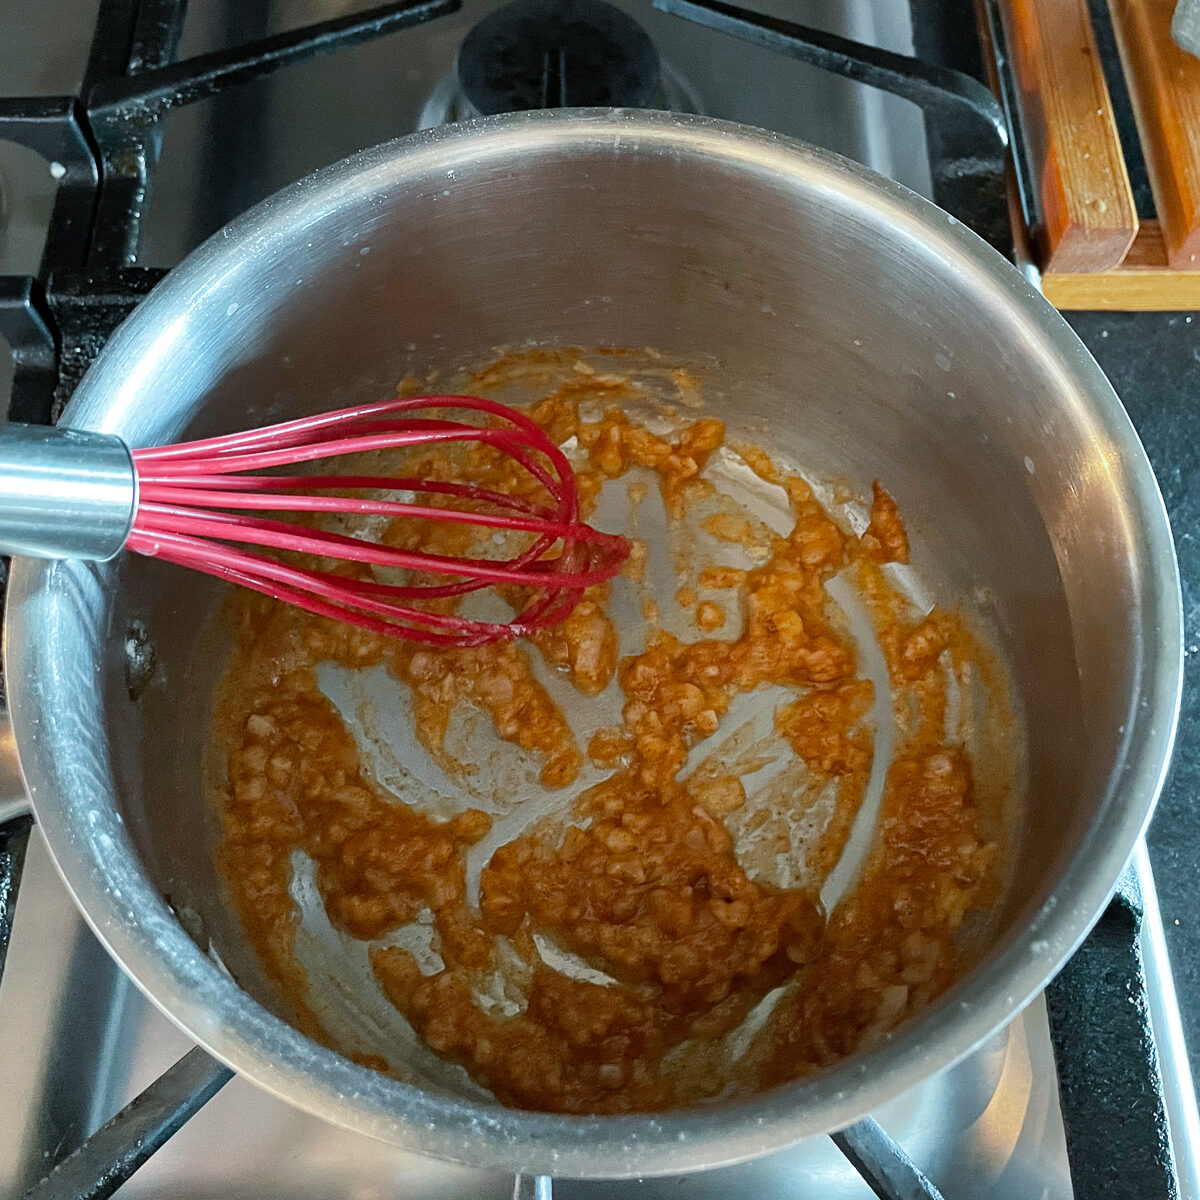 The flour, paprika and onion has created an orange paste that is cooking in the saucepan.